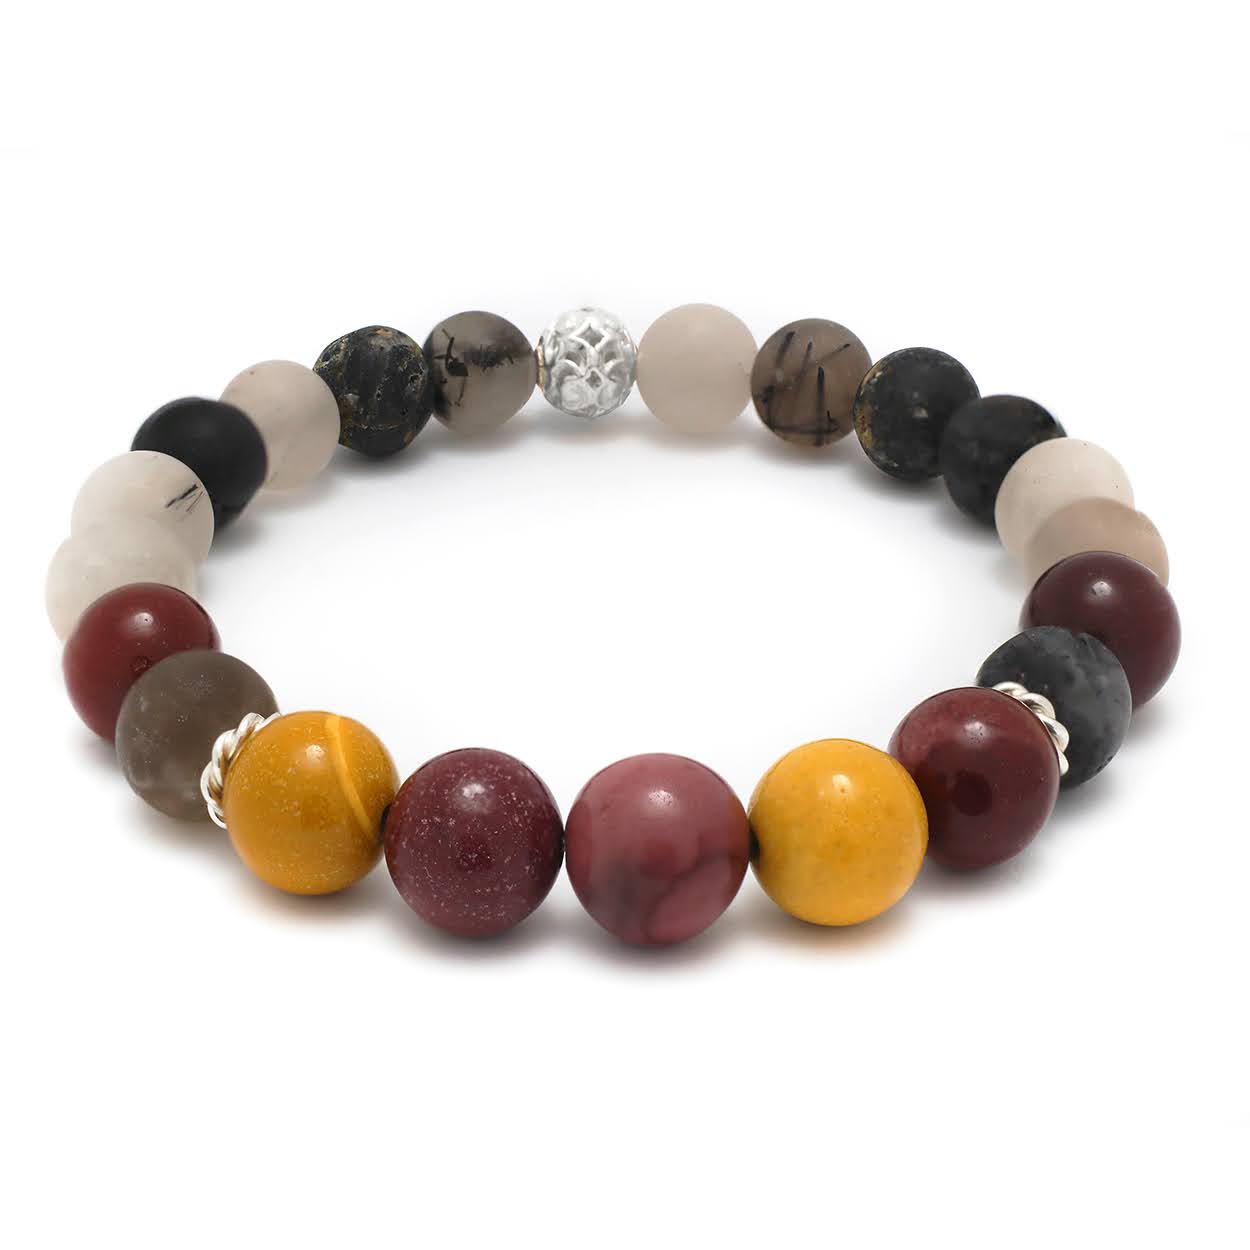 Earthly Elements - Frosted Black Tourmaline & Mookaite